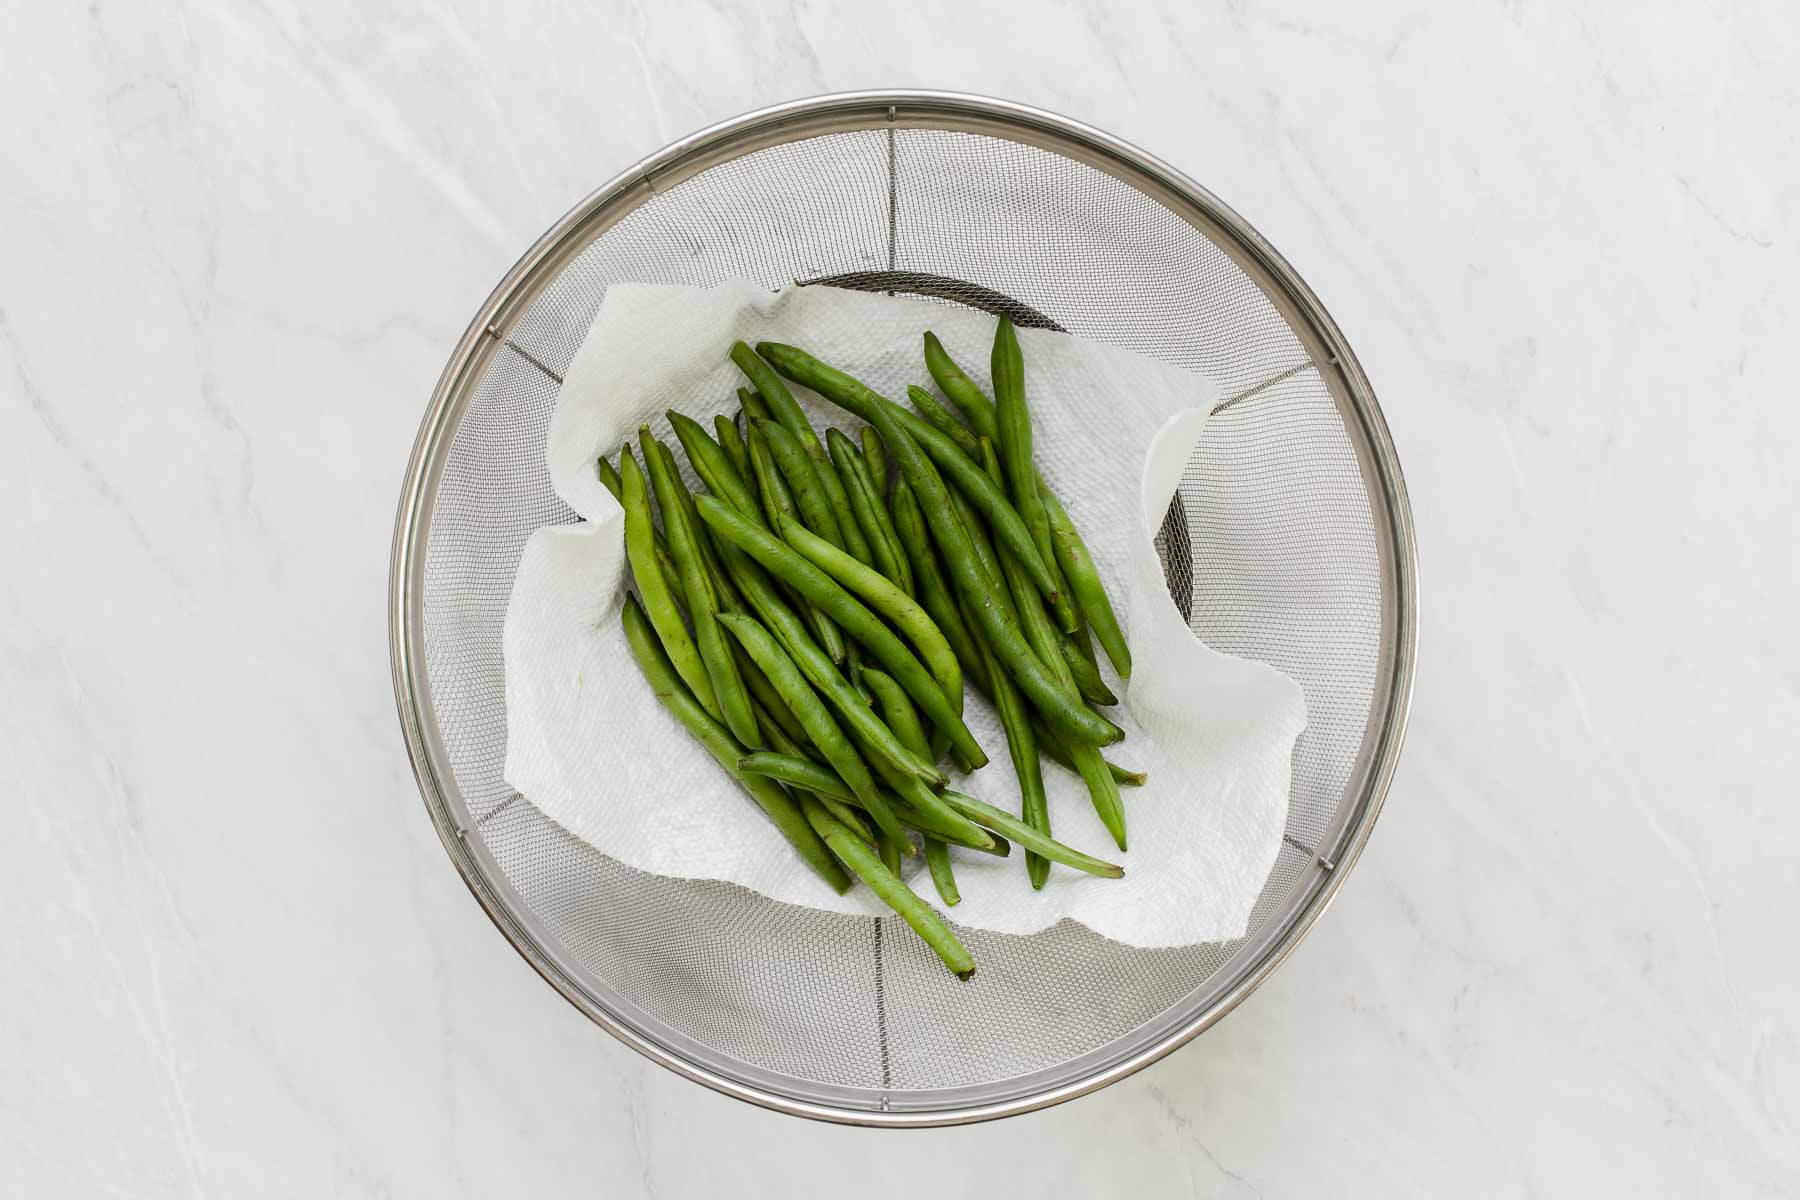 Green beans in a colander on a paper towel.